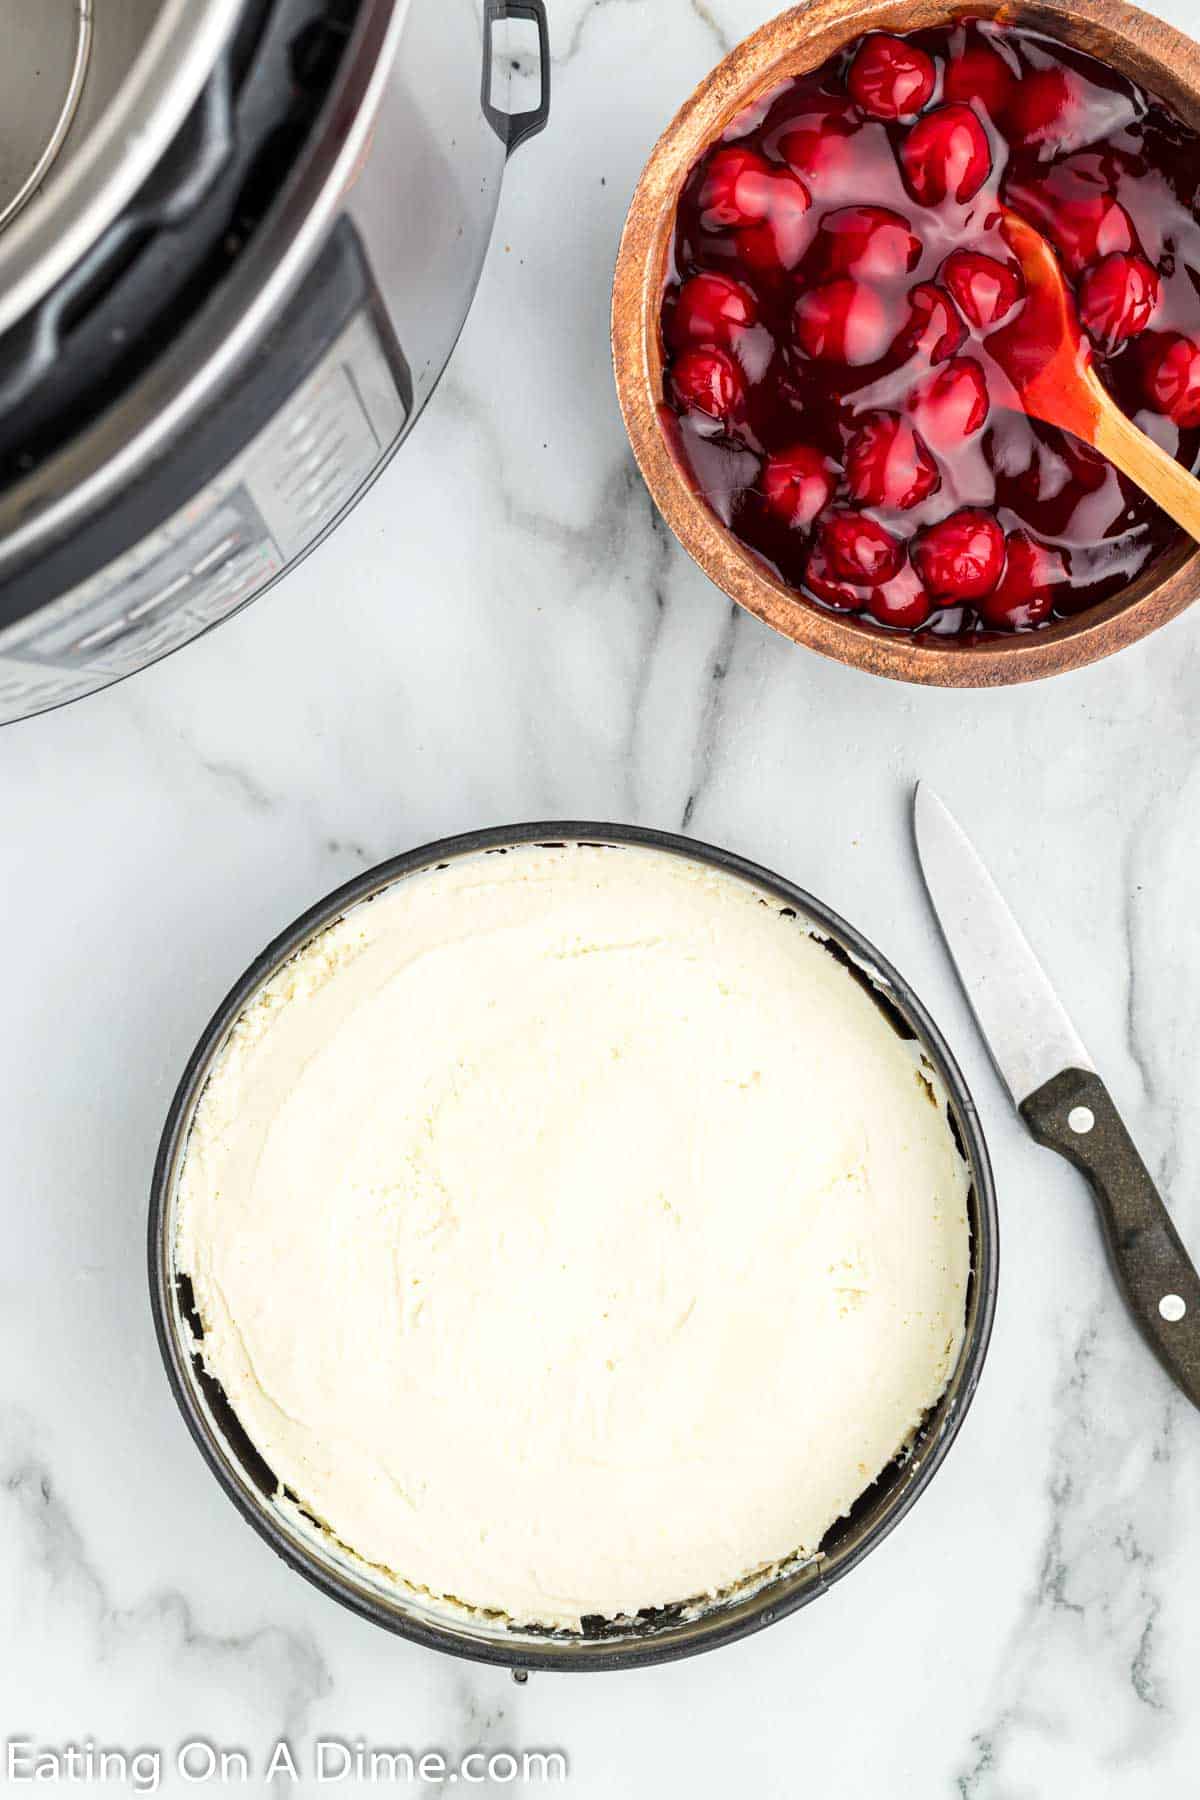 Cooked cheesecake in the pan